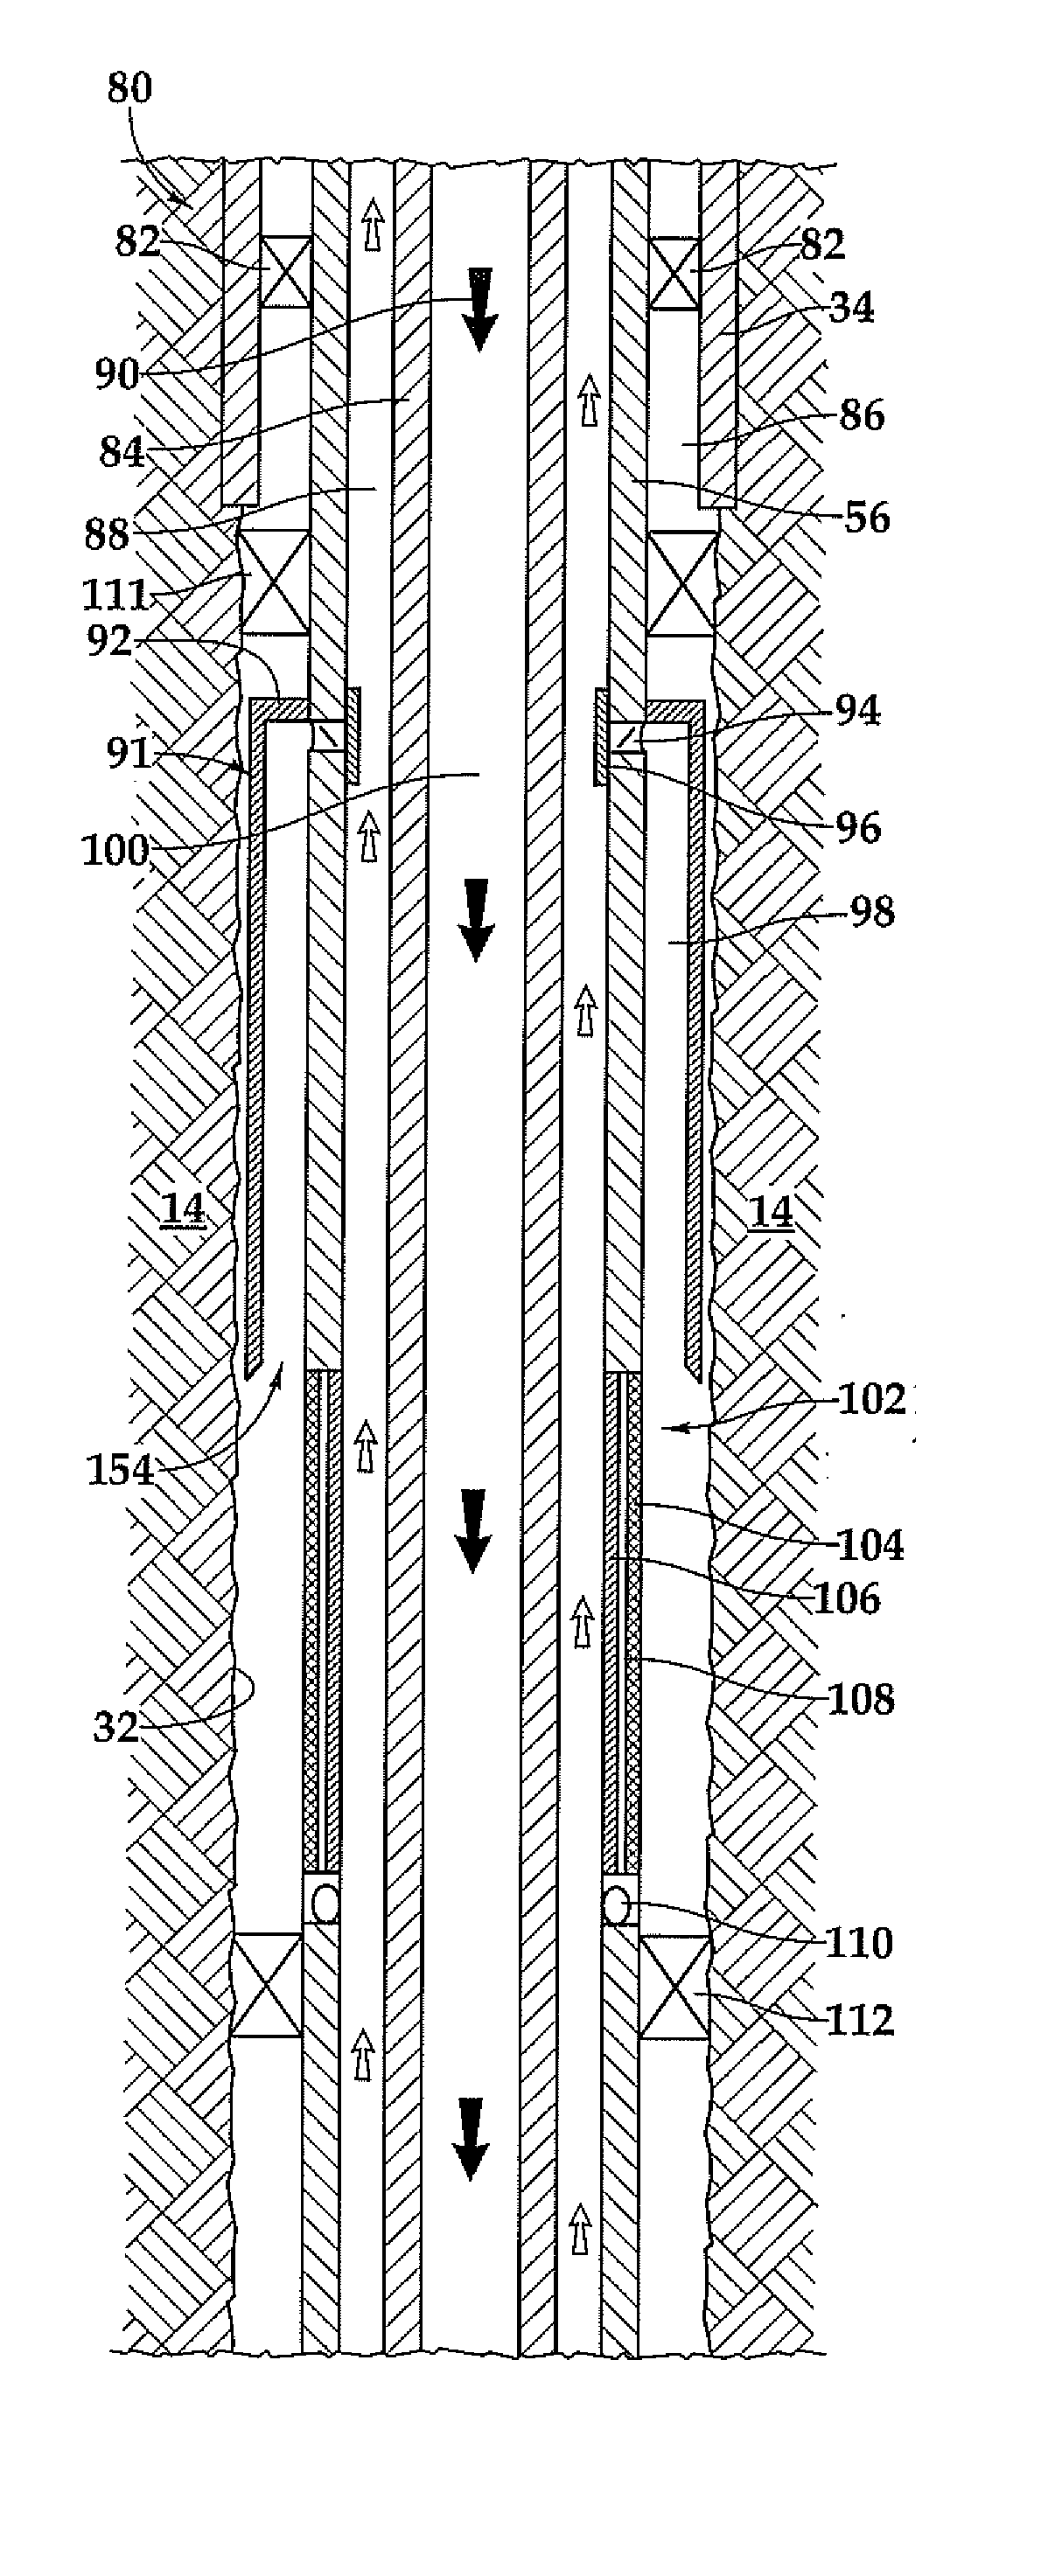 Open Hole Completion Apparatus and Method for Use of Same